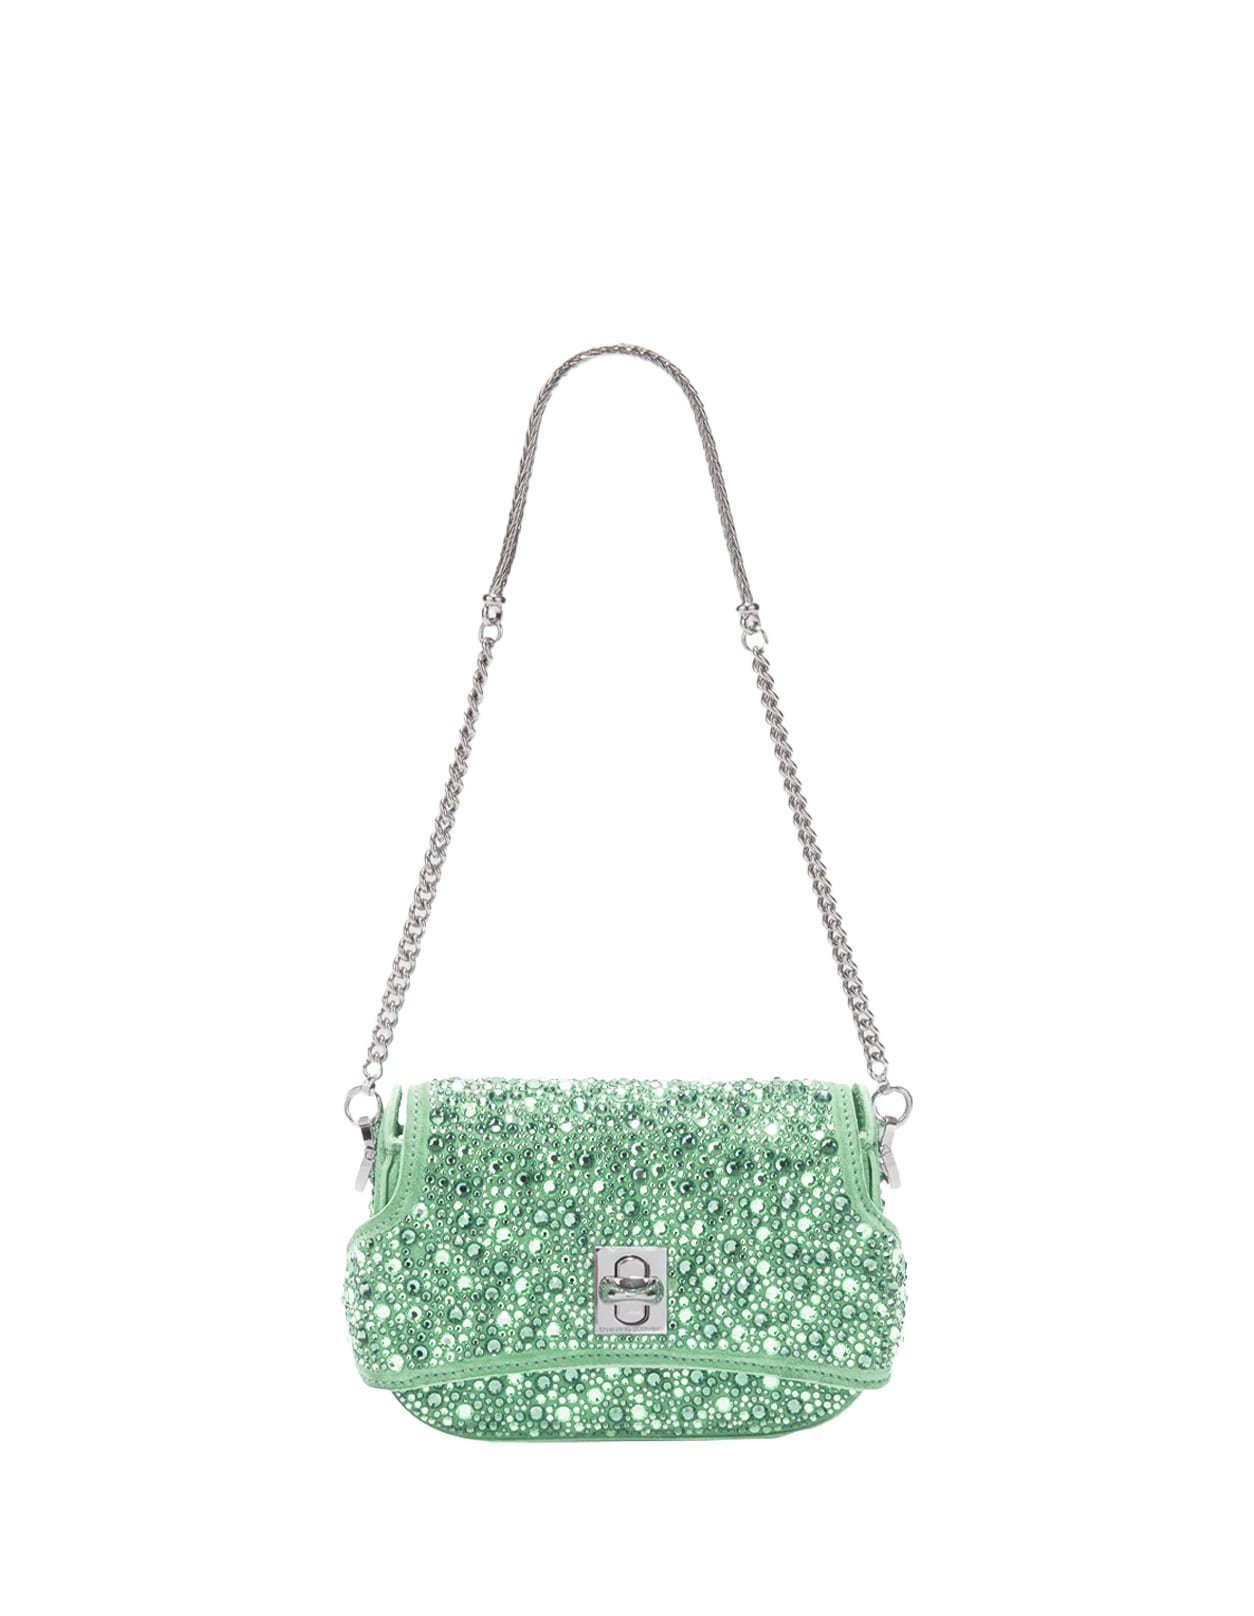 Green Audrey Bag With Crystals